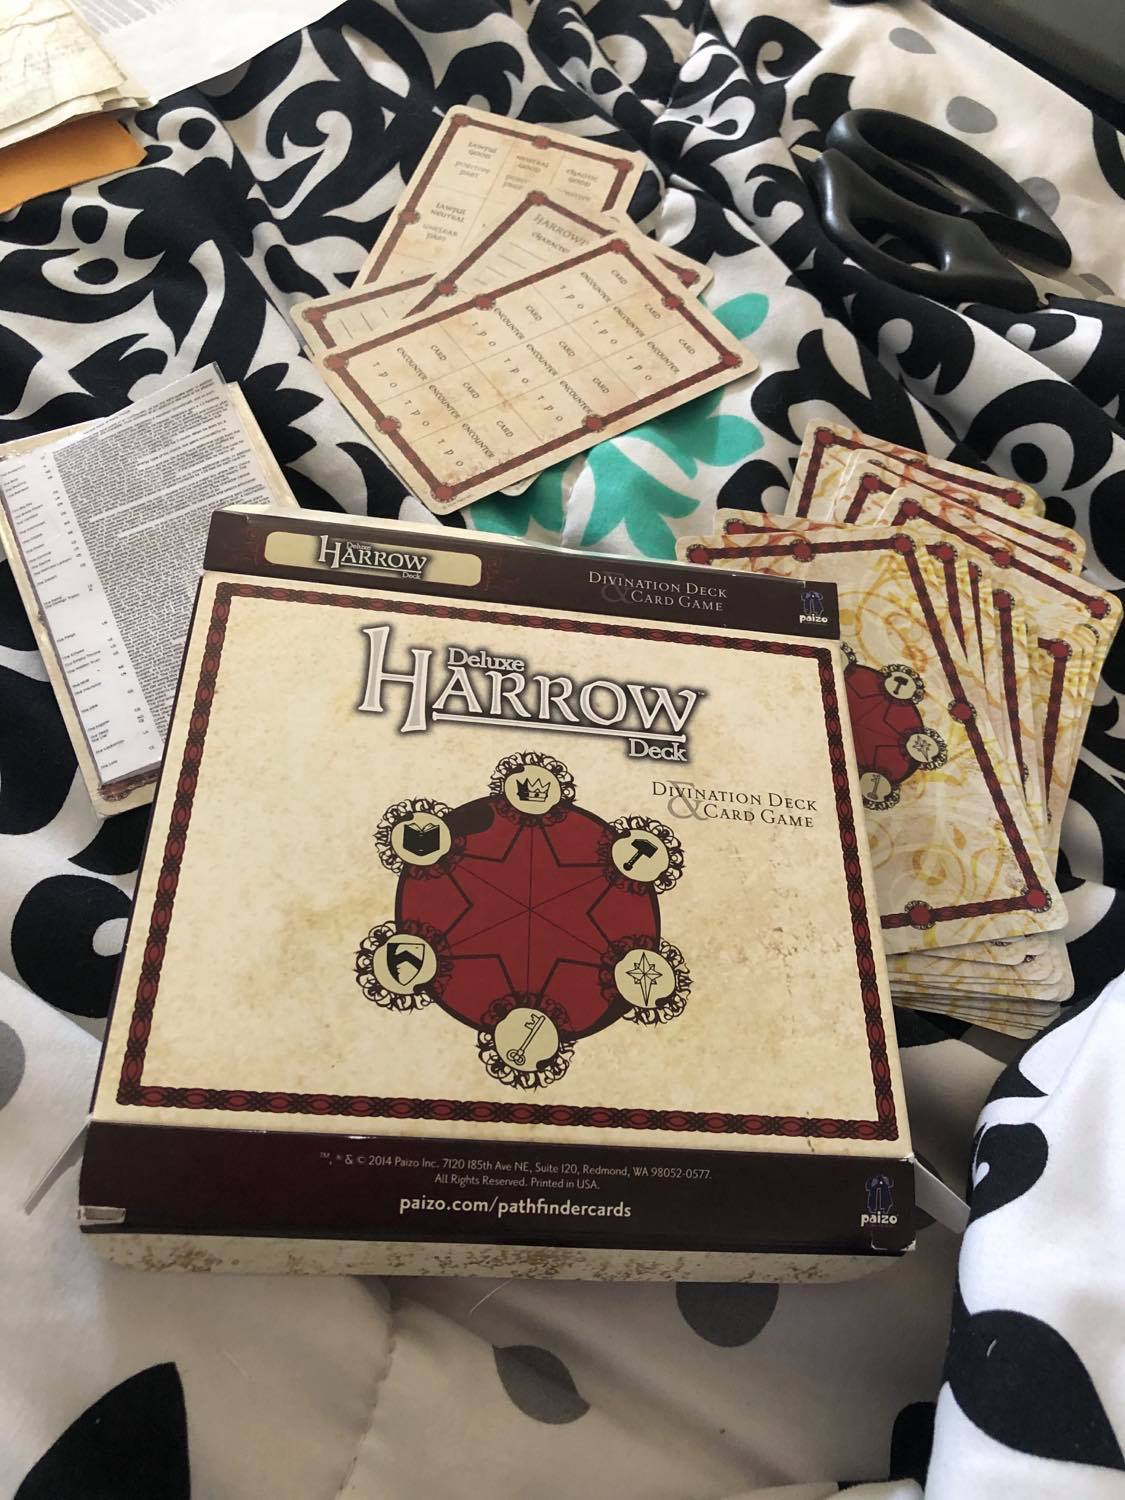 The original box, which is two cards wide for some reason. It is layong on top of the deck of many things card, the actual divination instruction cards, and the harrow cards themselves. The box says 'Deluxe Harrow Deck Divination Deck & Card Game' in grey text on a light brown background, with the card's logo image underneath. The logo itself is a dark brown six pointed star inside of a circle, with each corner being the symbols for each of a character attributes, that being a crown for charisma, a book for intelligence, a hammer for strength, a shield for constitution, a star for wisdom, and a key for dexterity.